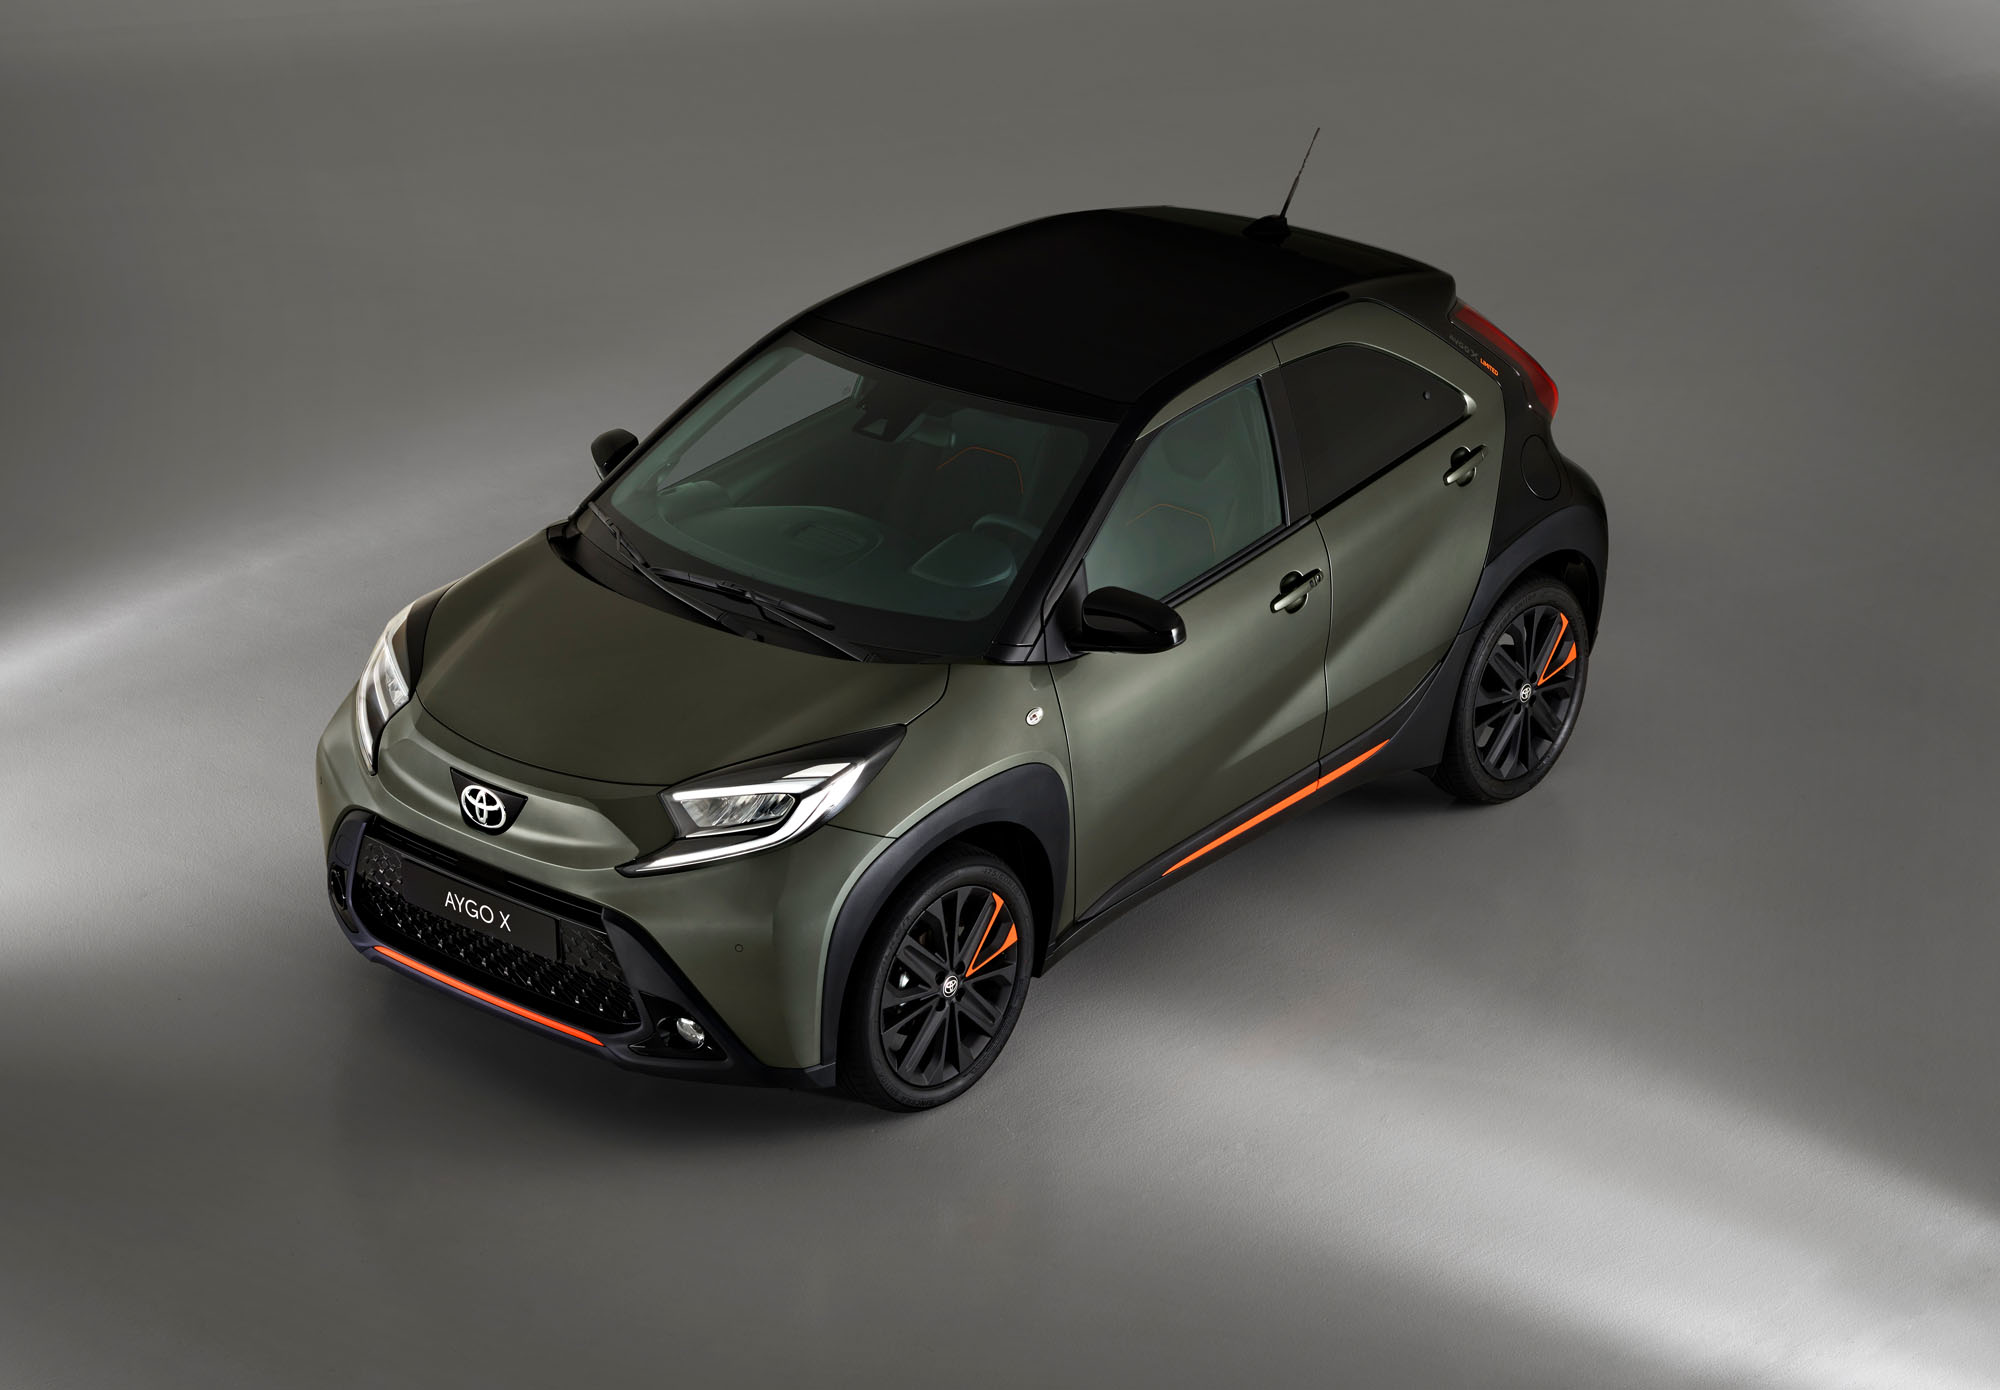 https://s1.cdn.autoevolution.com/images/news/toyota-launches-all-new-aygo-x-urban-crossover-because-everybody-deserves-a-cool-car-173486_1.jpg